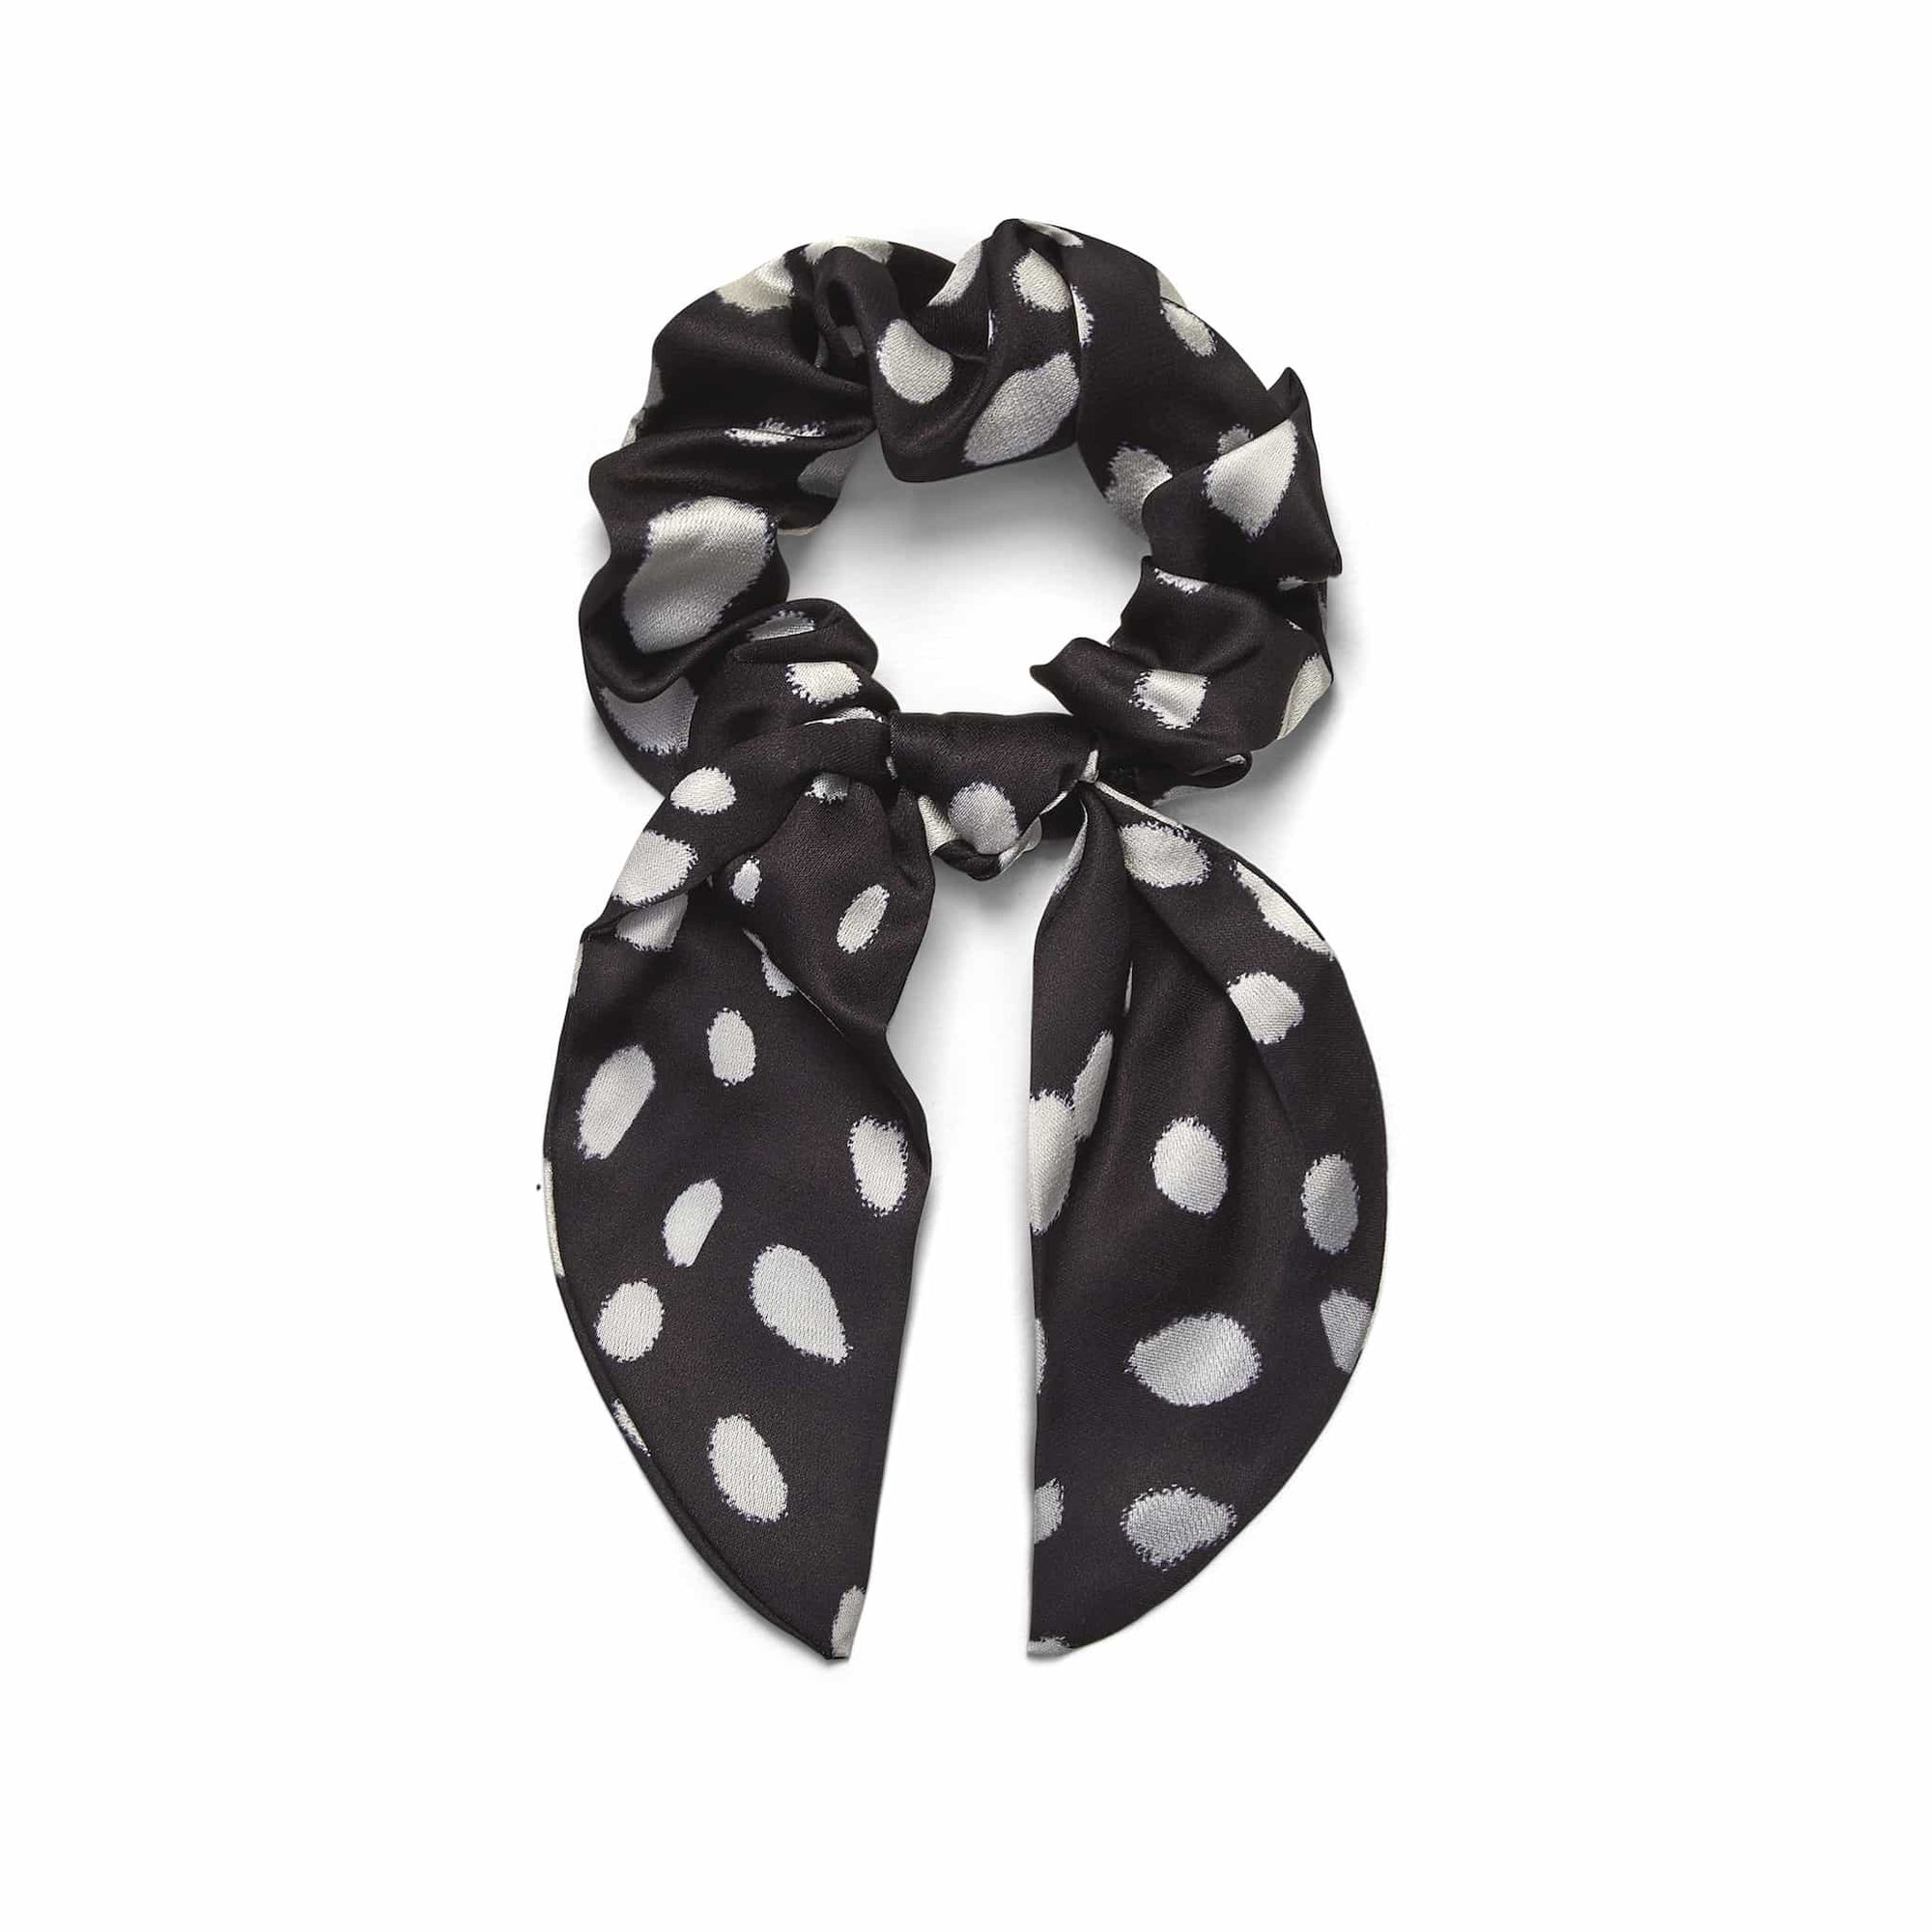 Only Curls Satin Scarf Scrunchie - Black Dot - Only Curls